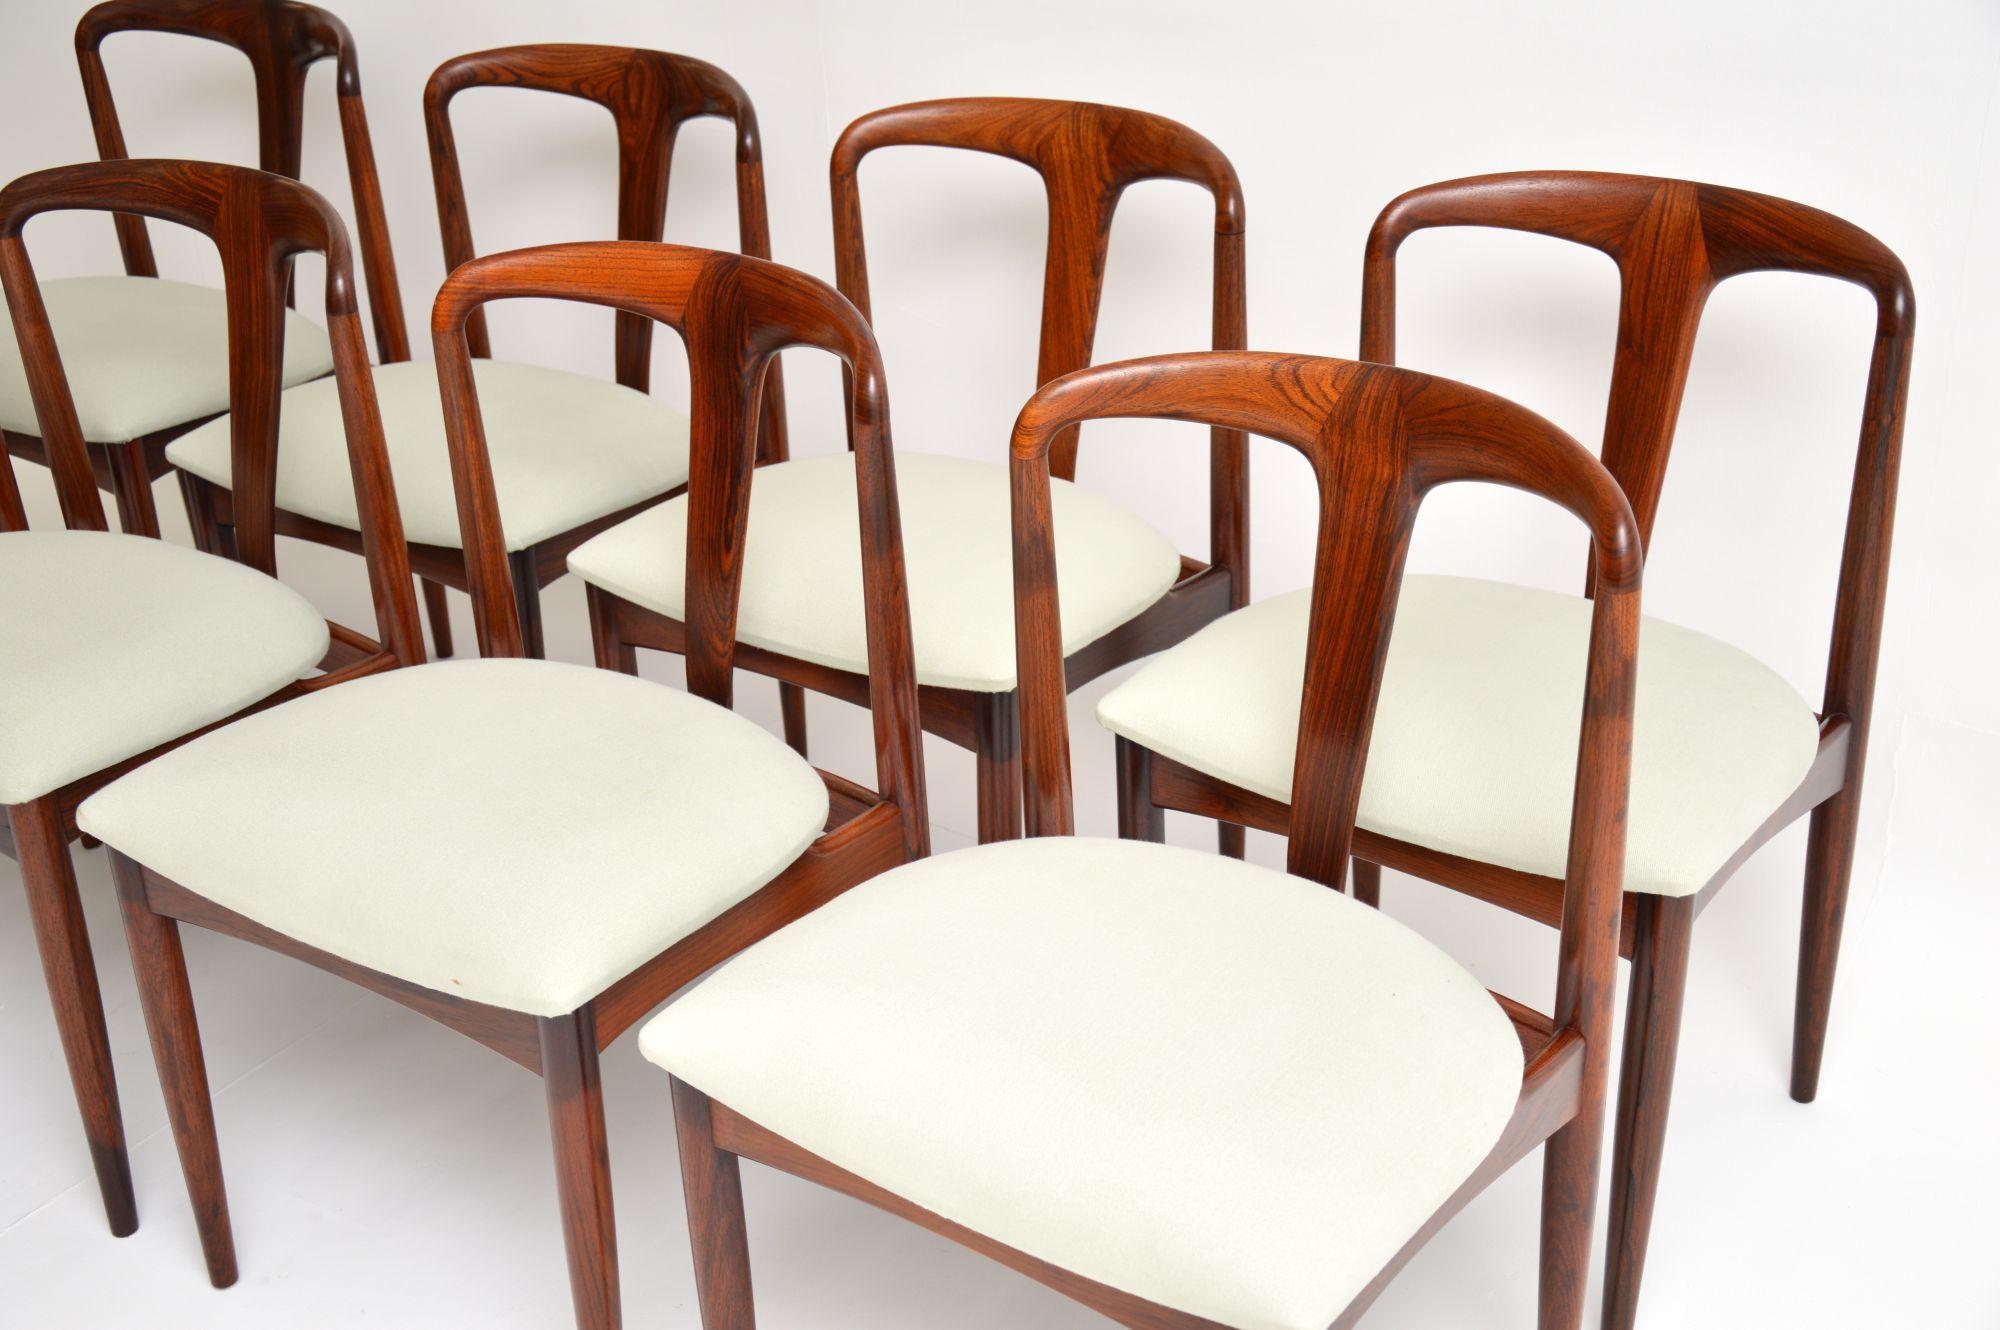 Set of 8 Danish Rosewood Julianne Dining Chairs by Johannes Andersen 1